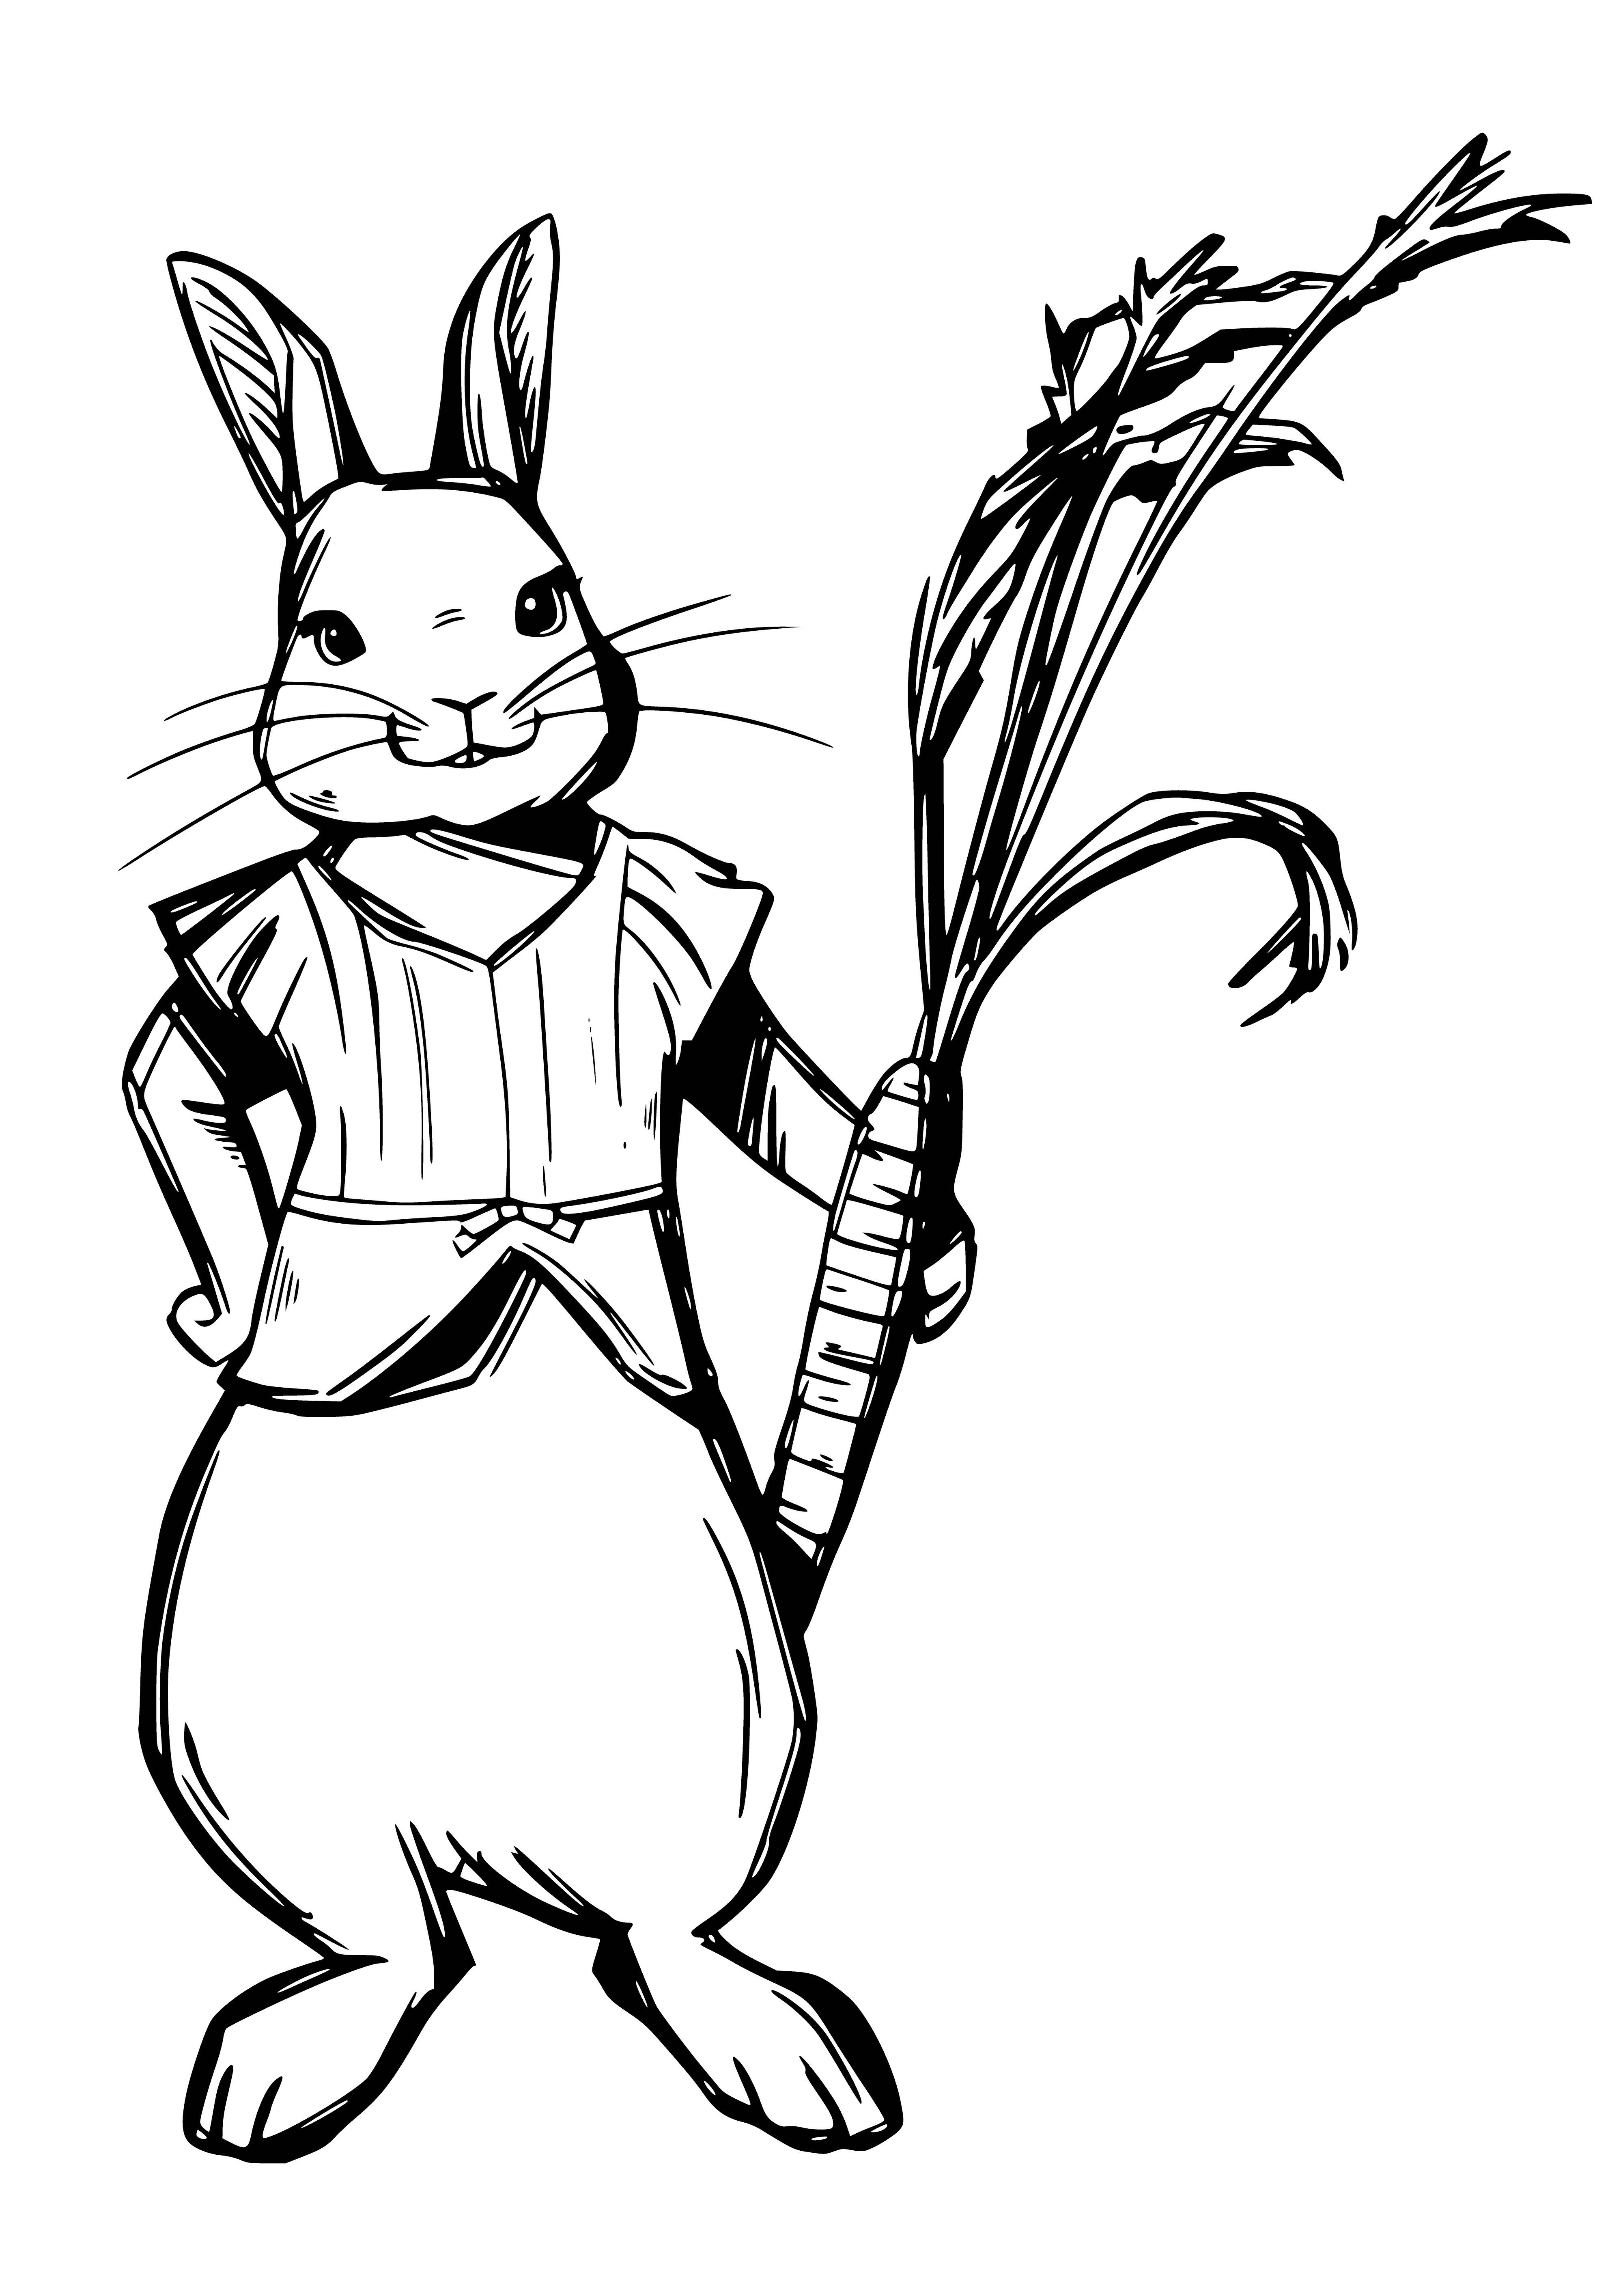 coloring page: Her big brown eyes have a gentle, understanding expression.

Mopsy, a gentle brown bunny, looks up with understanding eyes, as if knowing what you're feeling.